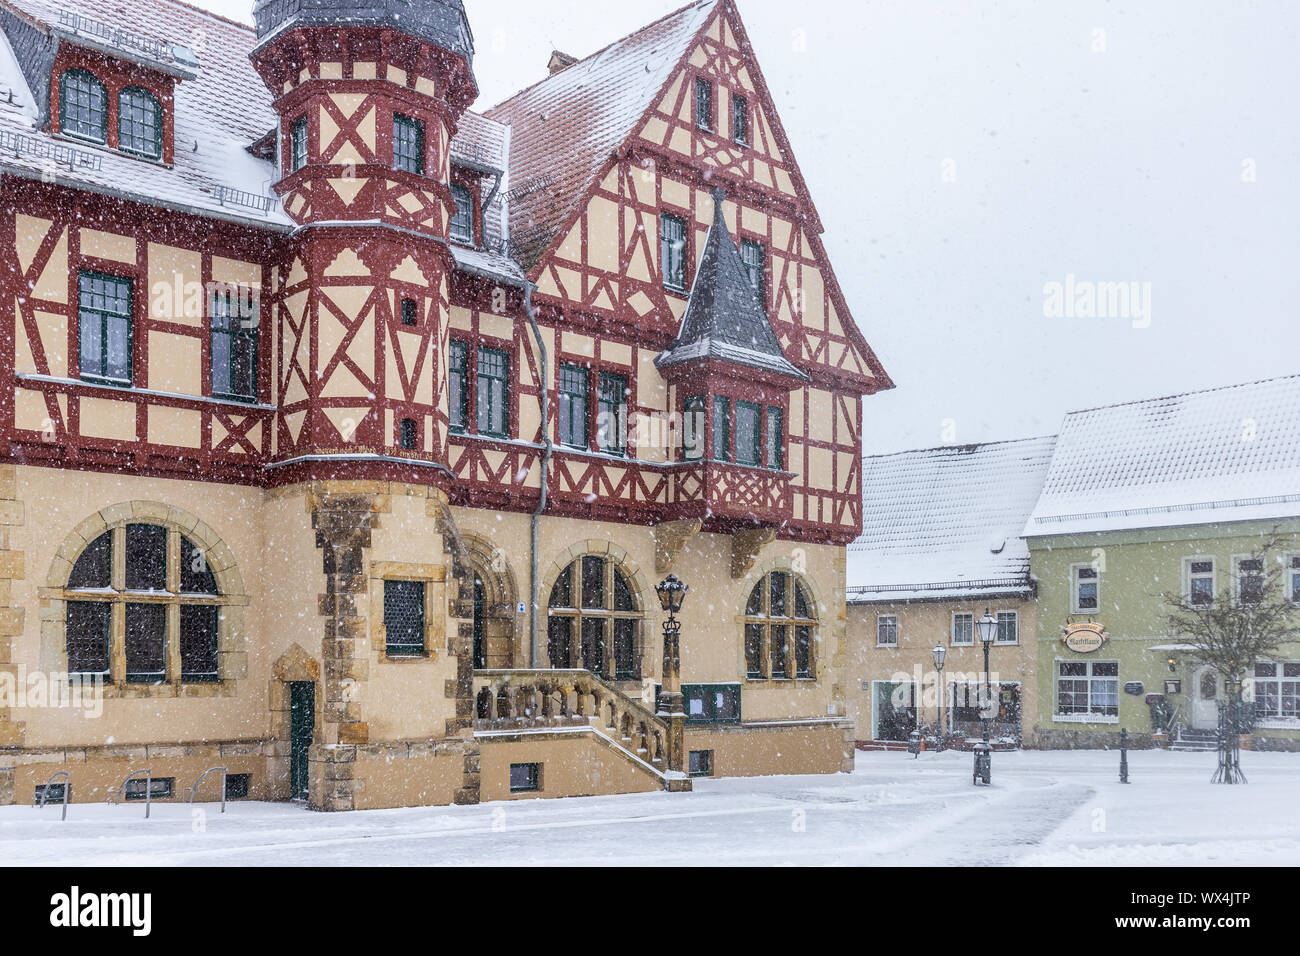 Impressions from Harzgerode in winter Stock Photo